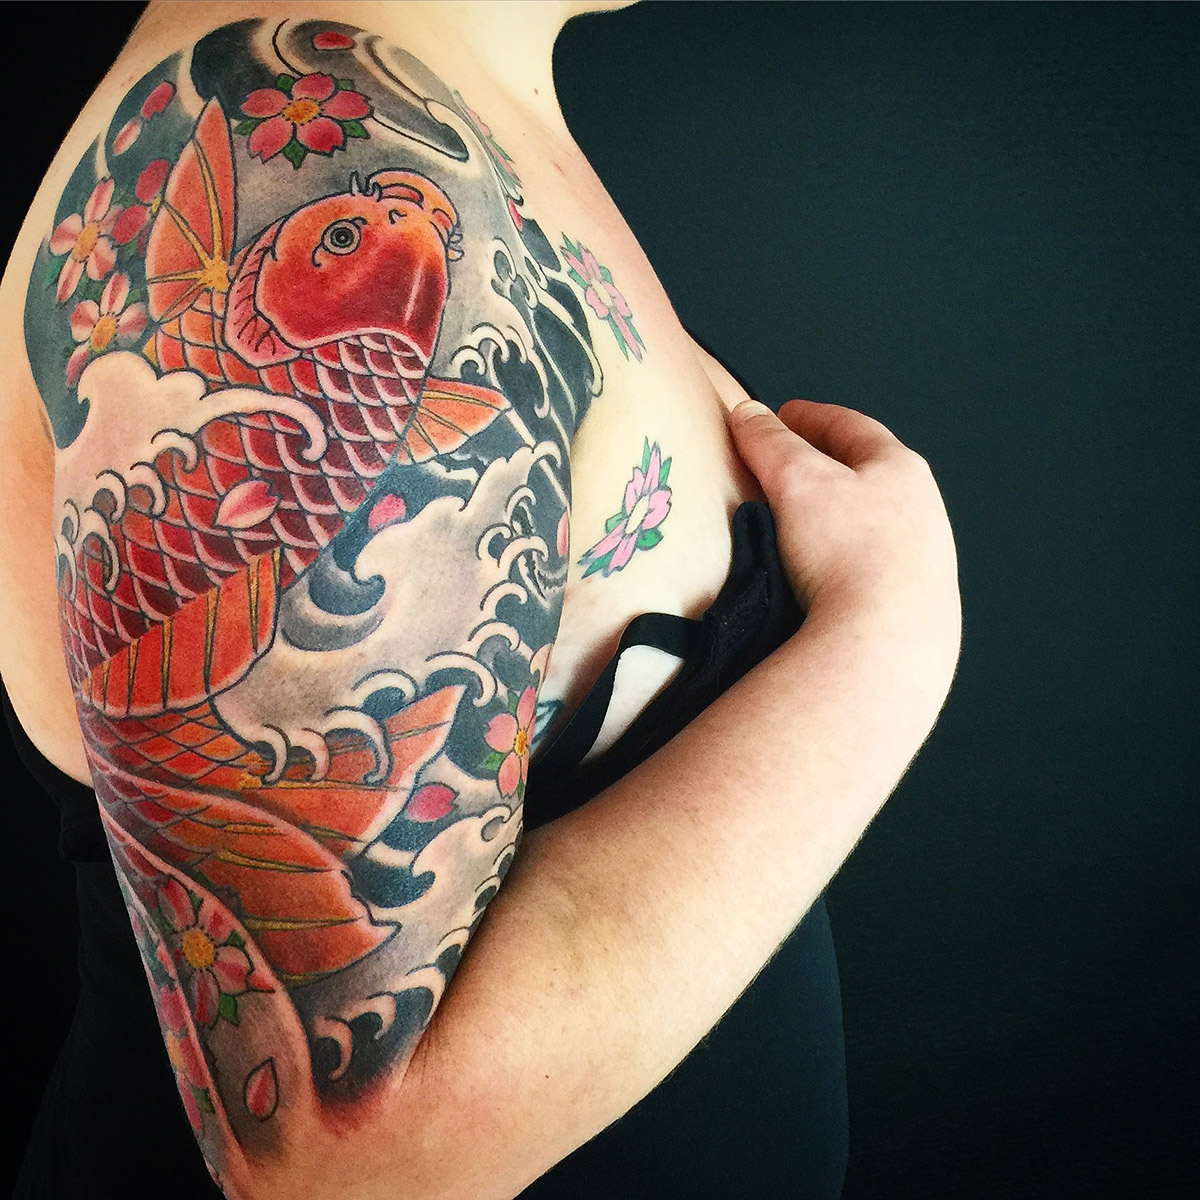 Koi fish tattoo on chest by Ren Sommers TattooNOW